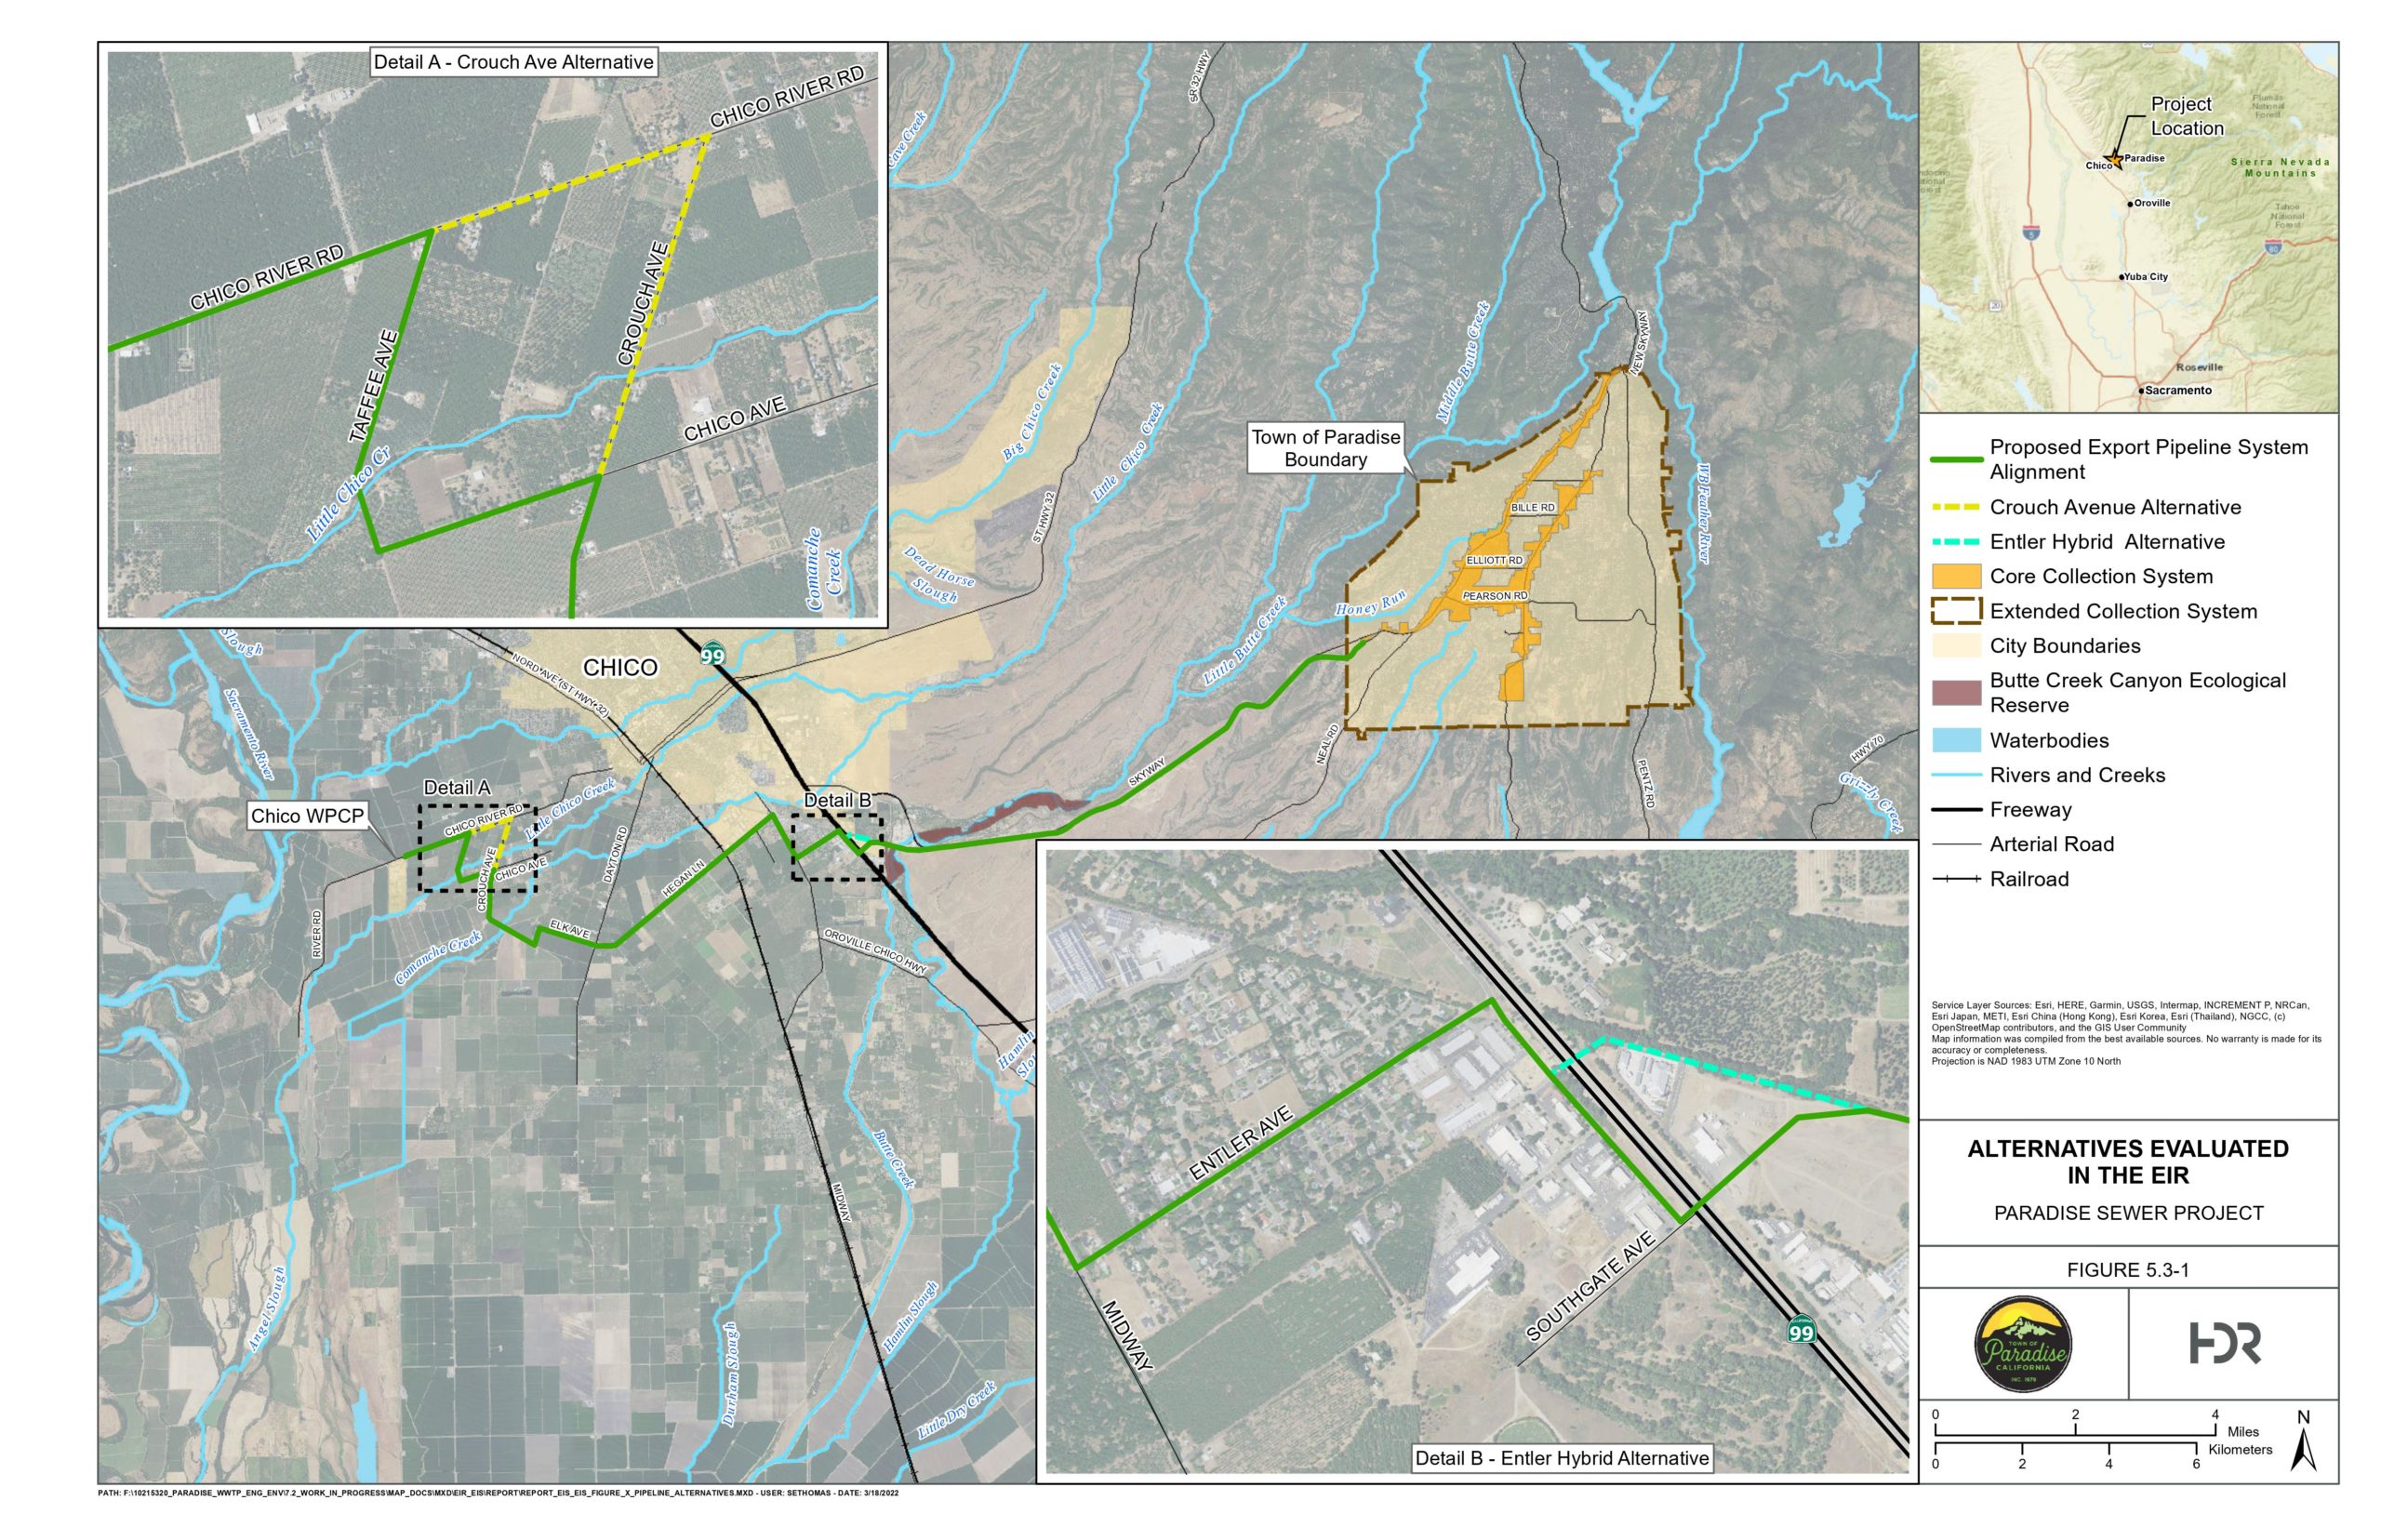 Project Overview Map Showing Sewer Service Area going from Chico WPCP to Paradise